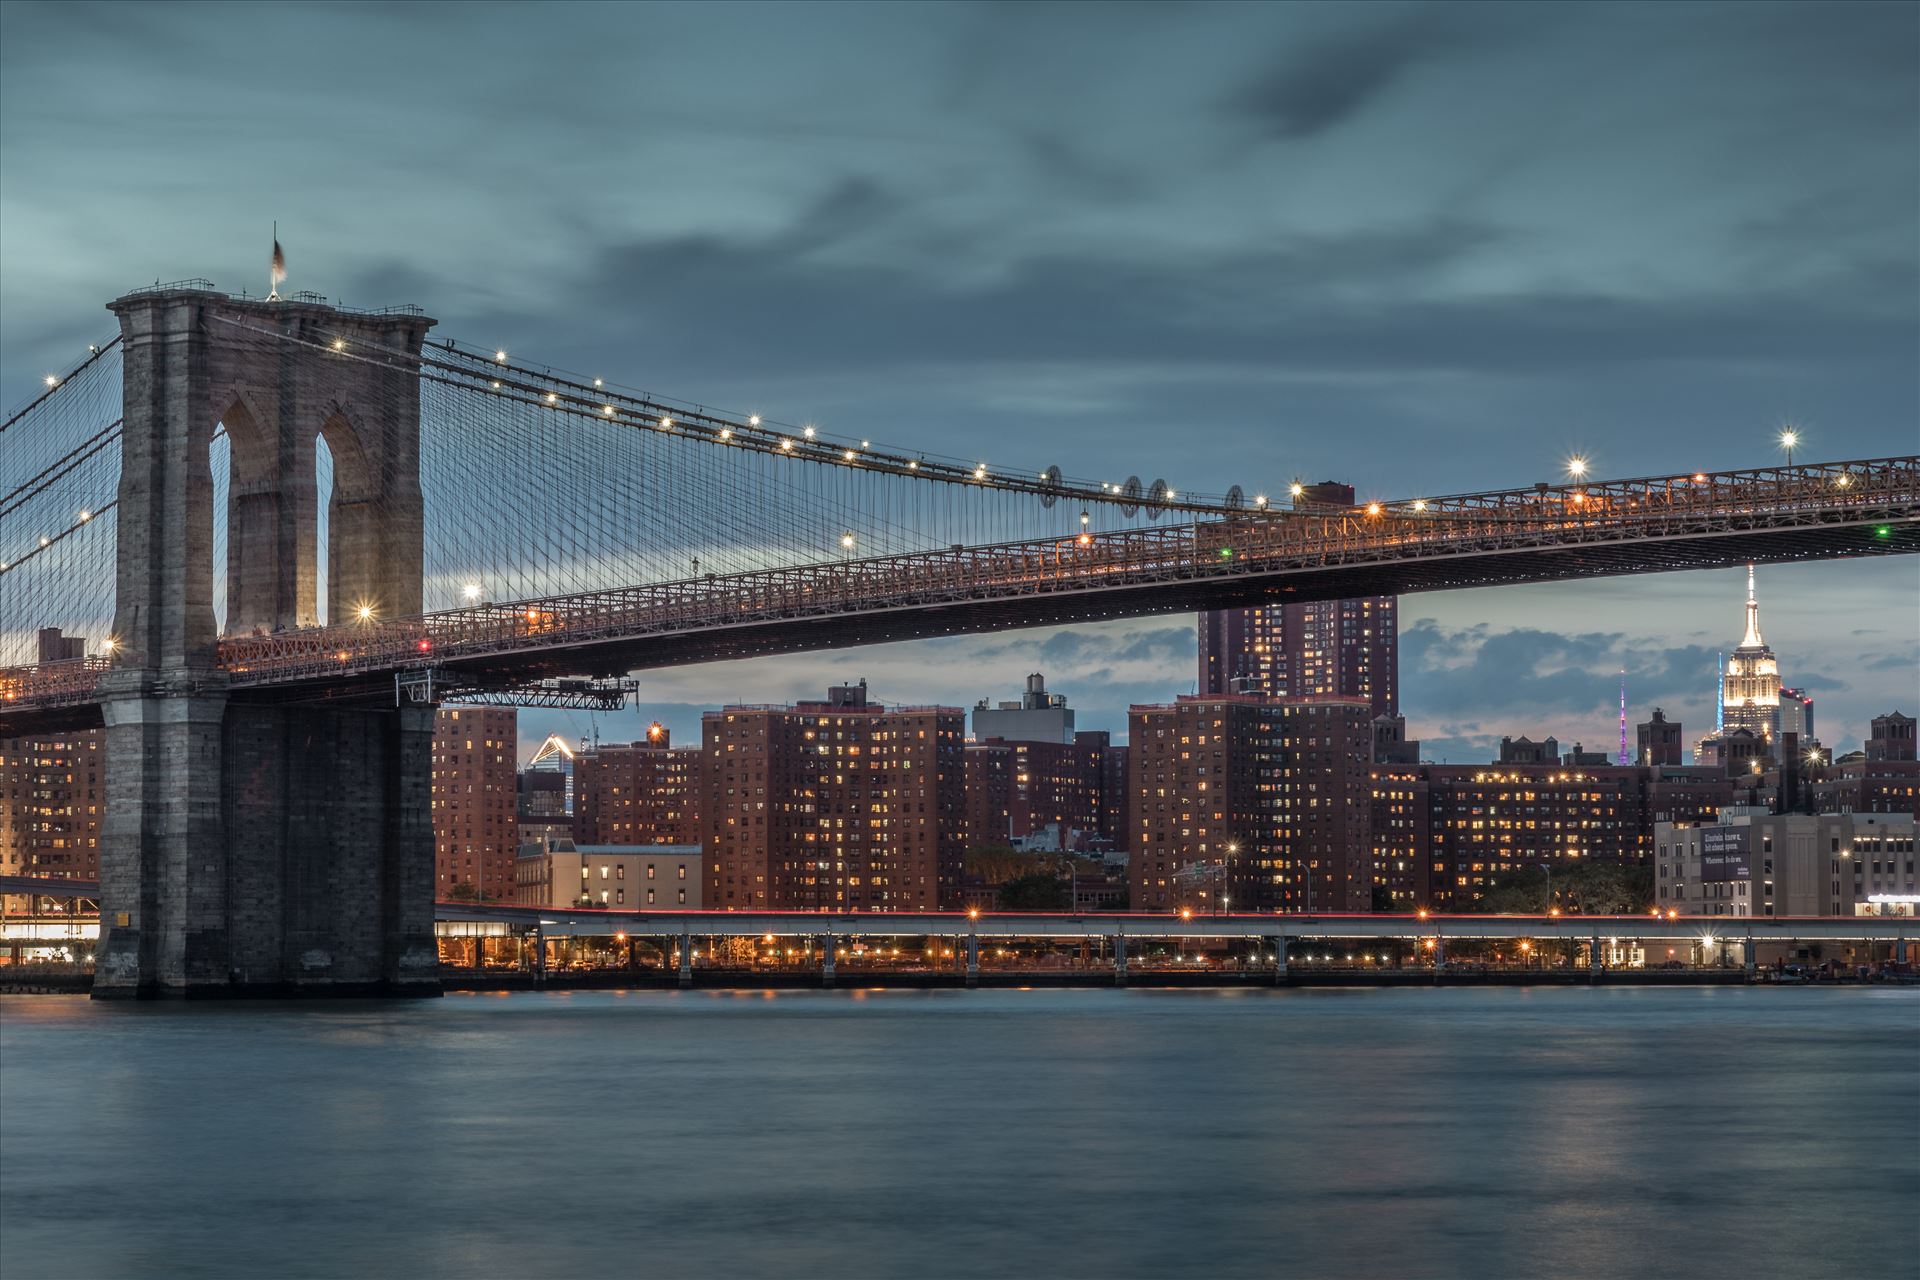 Brooklyn Bridge in New York The iconic Brooklyn Bridge in New York spanning the East River between Brooklyn and Lower Manhattan with the Empire State Building in the distance on the right. by Tony Keogh Photography